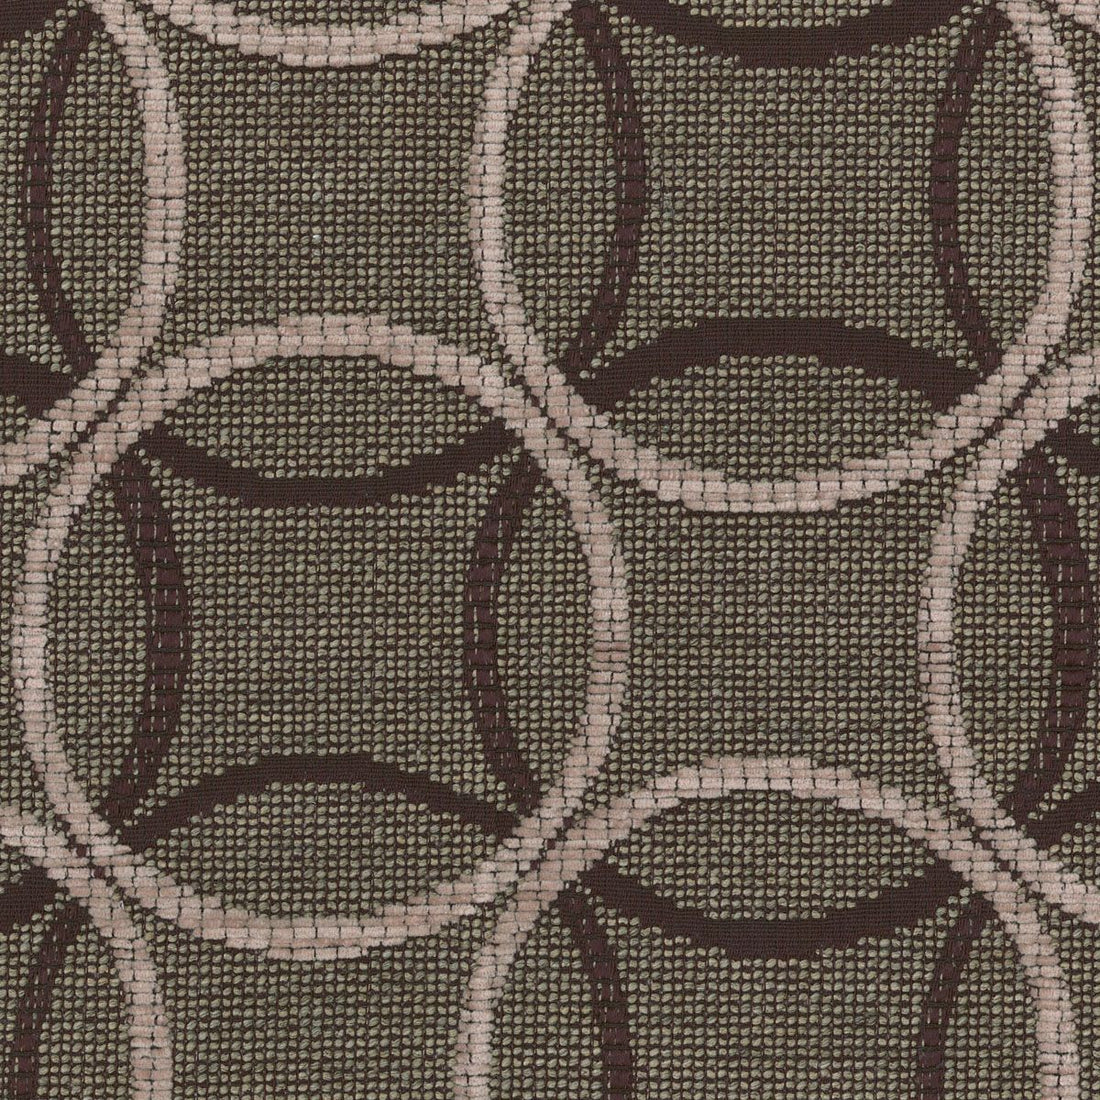 Klosters fabric in chocolate color - pattern number RH 00033872 - by Scalamandre in the Old World Weavers collection